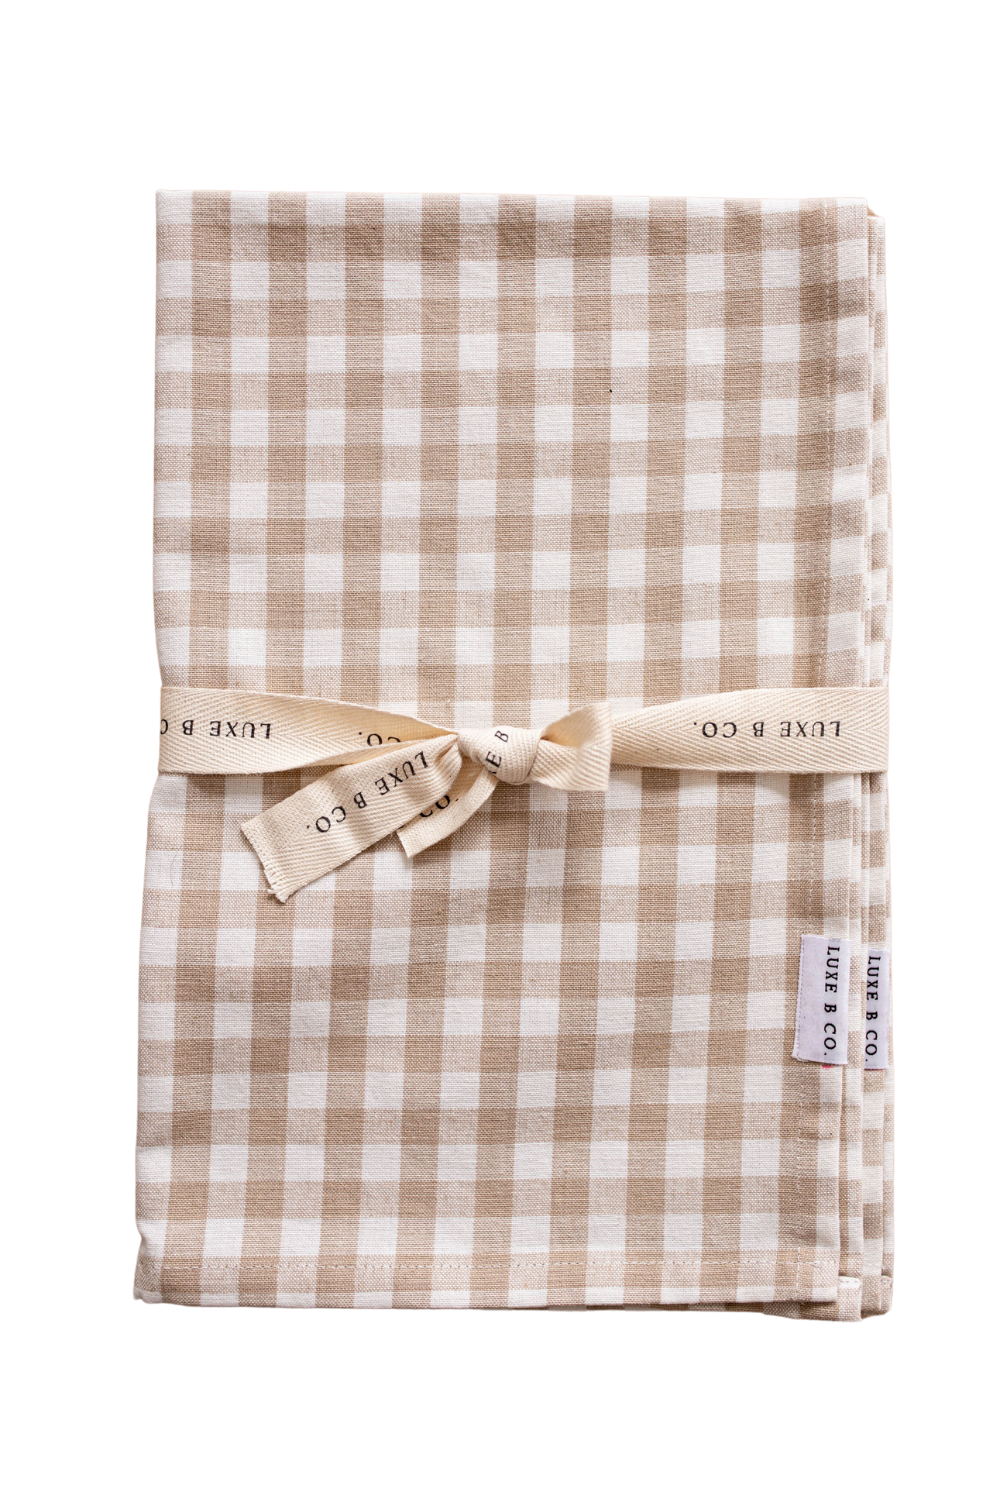 Beige Gingham Kitchen Dish Towel - Luxe B Co